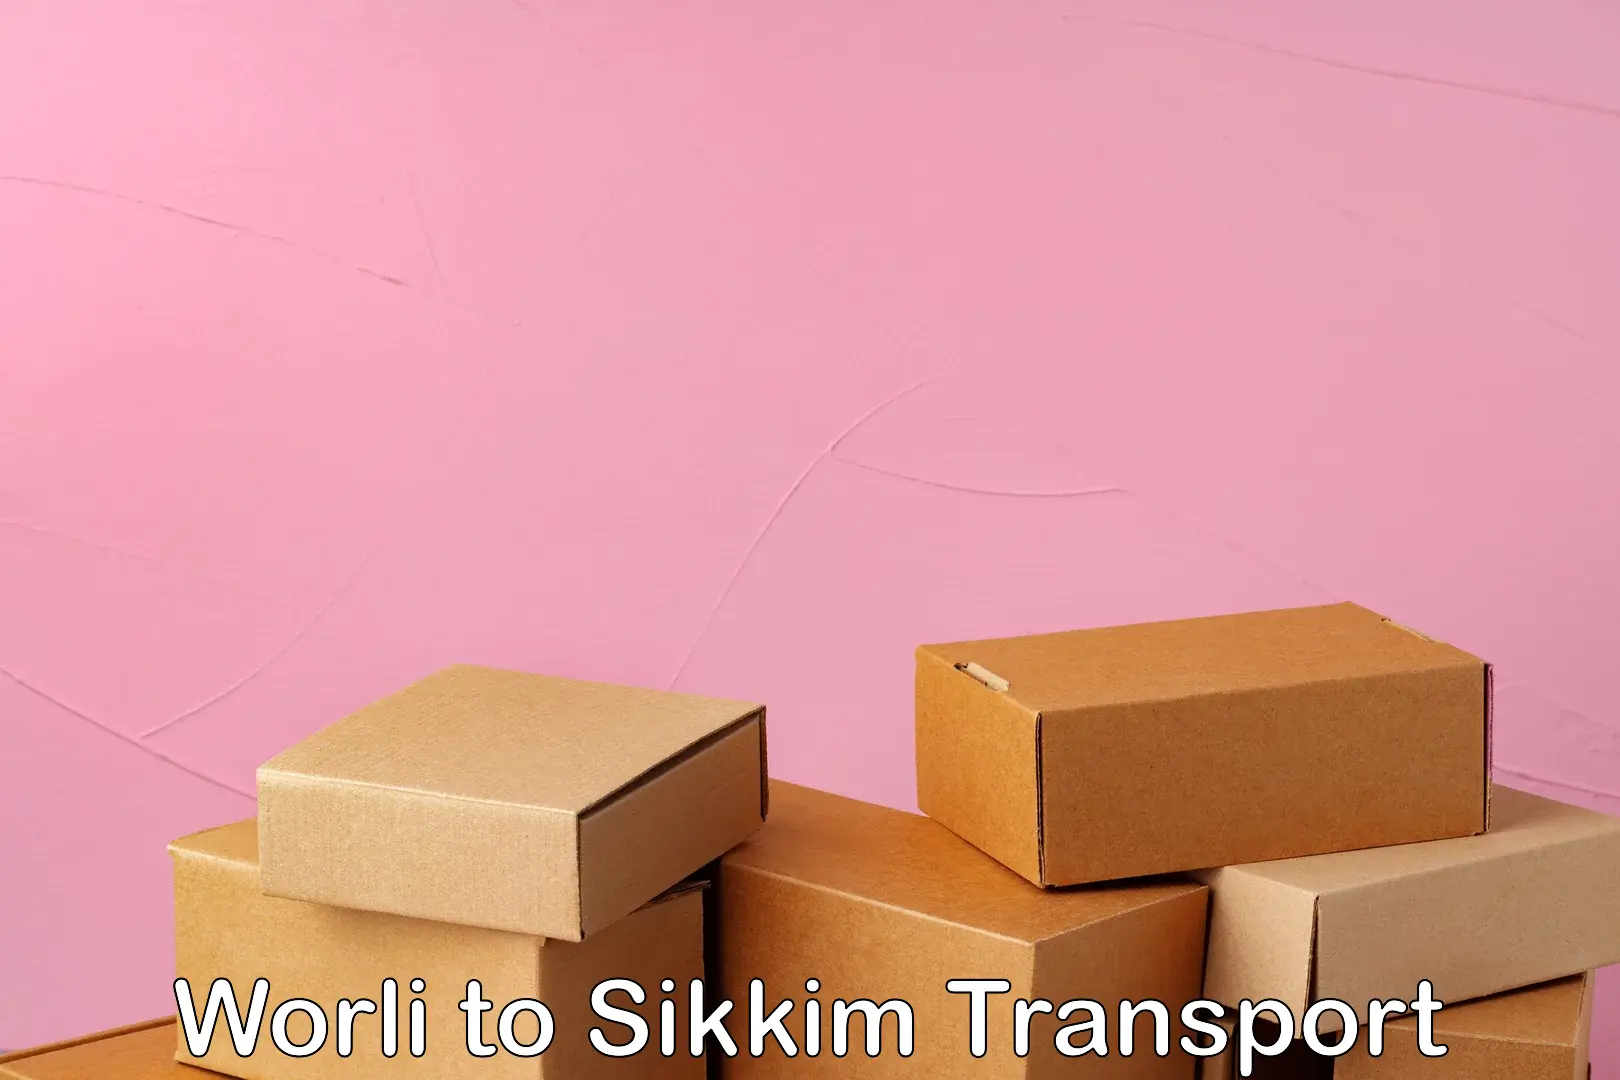 Container transport service Worli to Sikkim